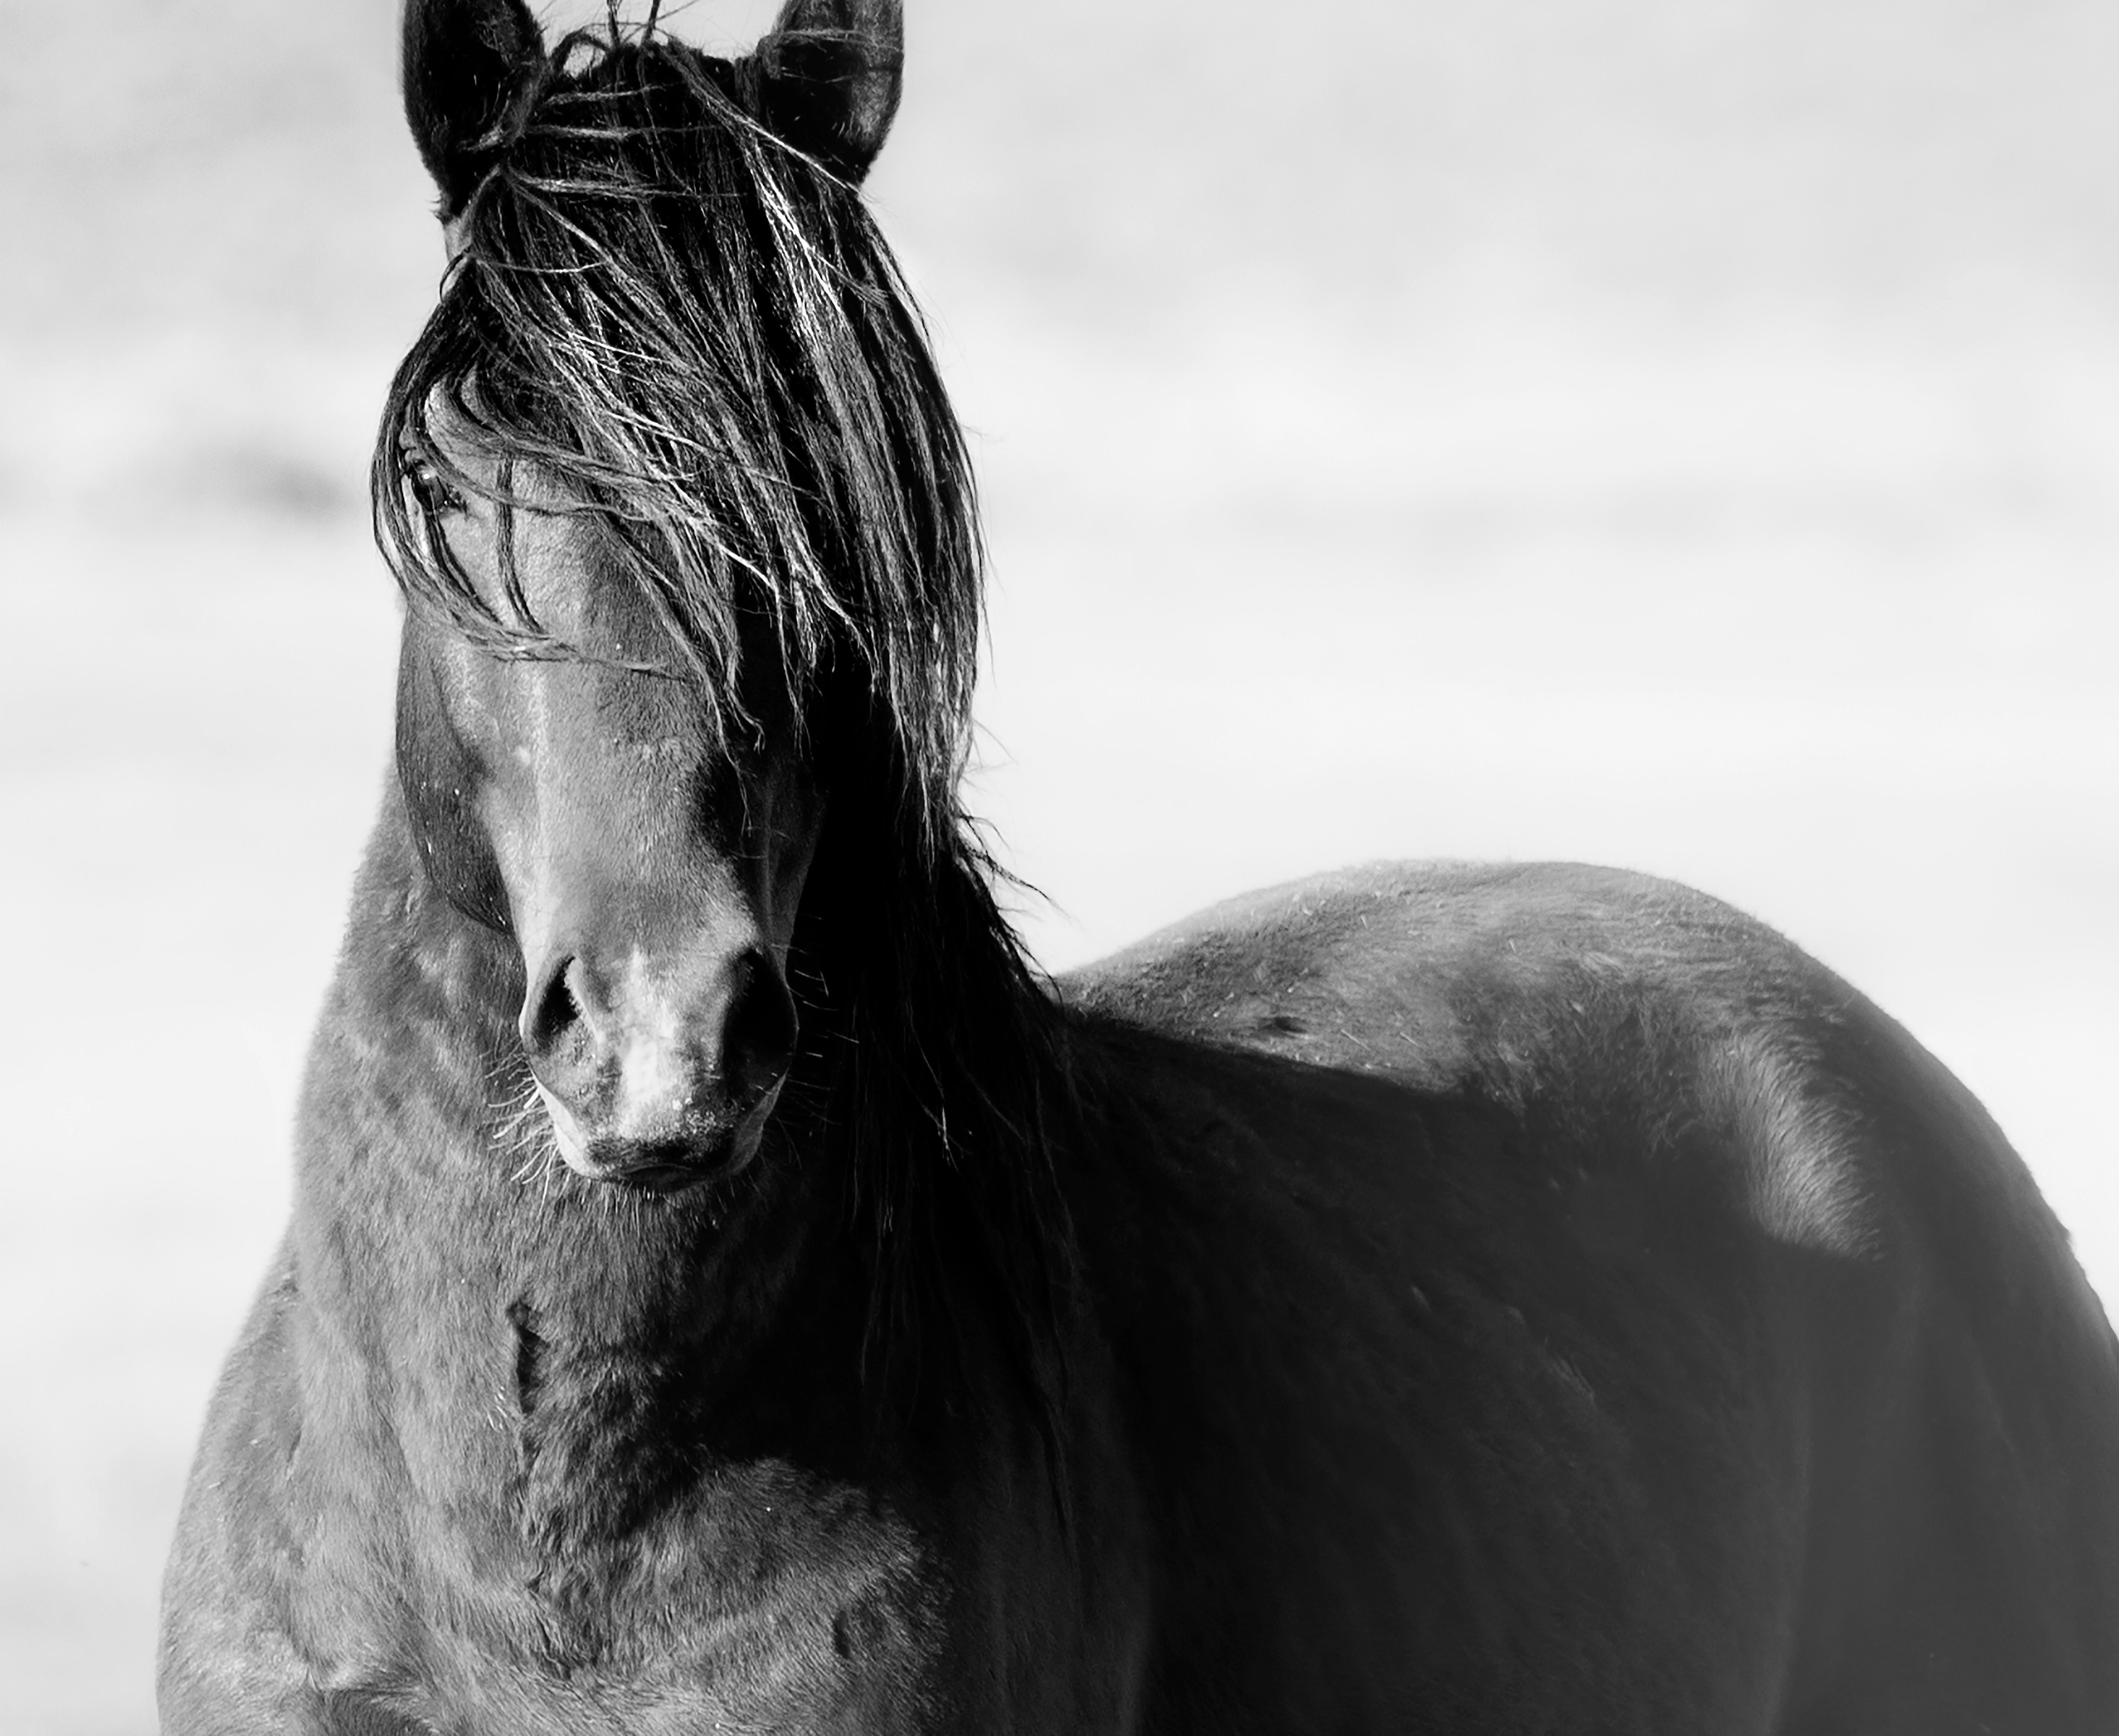 This is a contemporary black and white photograph of a Wild Mustang by Shane Russeck. 
"They represent the ultimate expression of American freedom"
Edition of 12
Printed on archival paper using archival inks
Signed and numbered
Framing available.